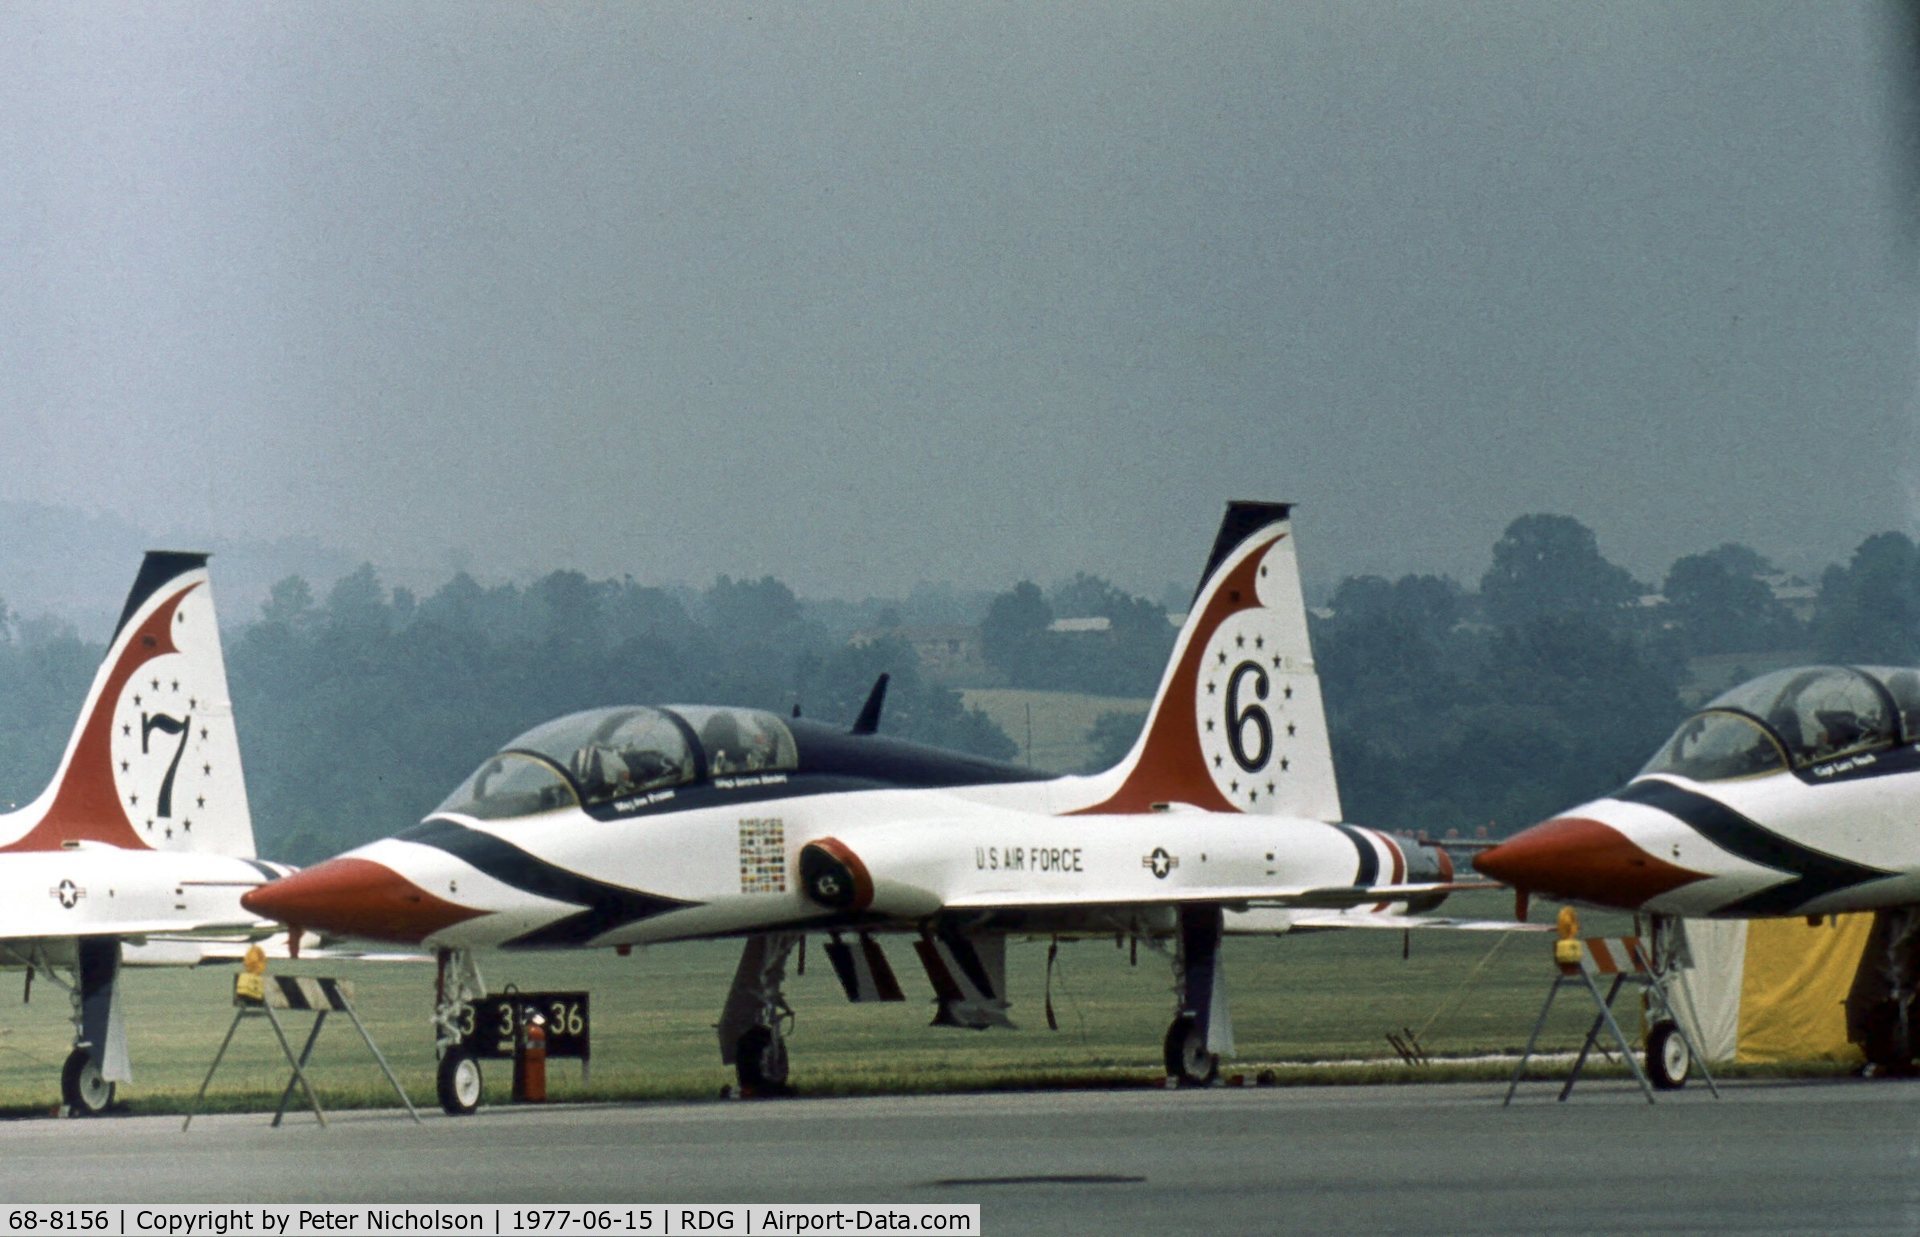 68-8156, 1968 Northrop T-38A Talon C/N T.6161, T-38A Talon, number 6 of the Thunderbirds aerial demonstration team, at the 1977 Reading Airshow.